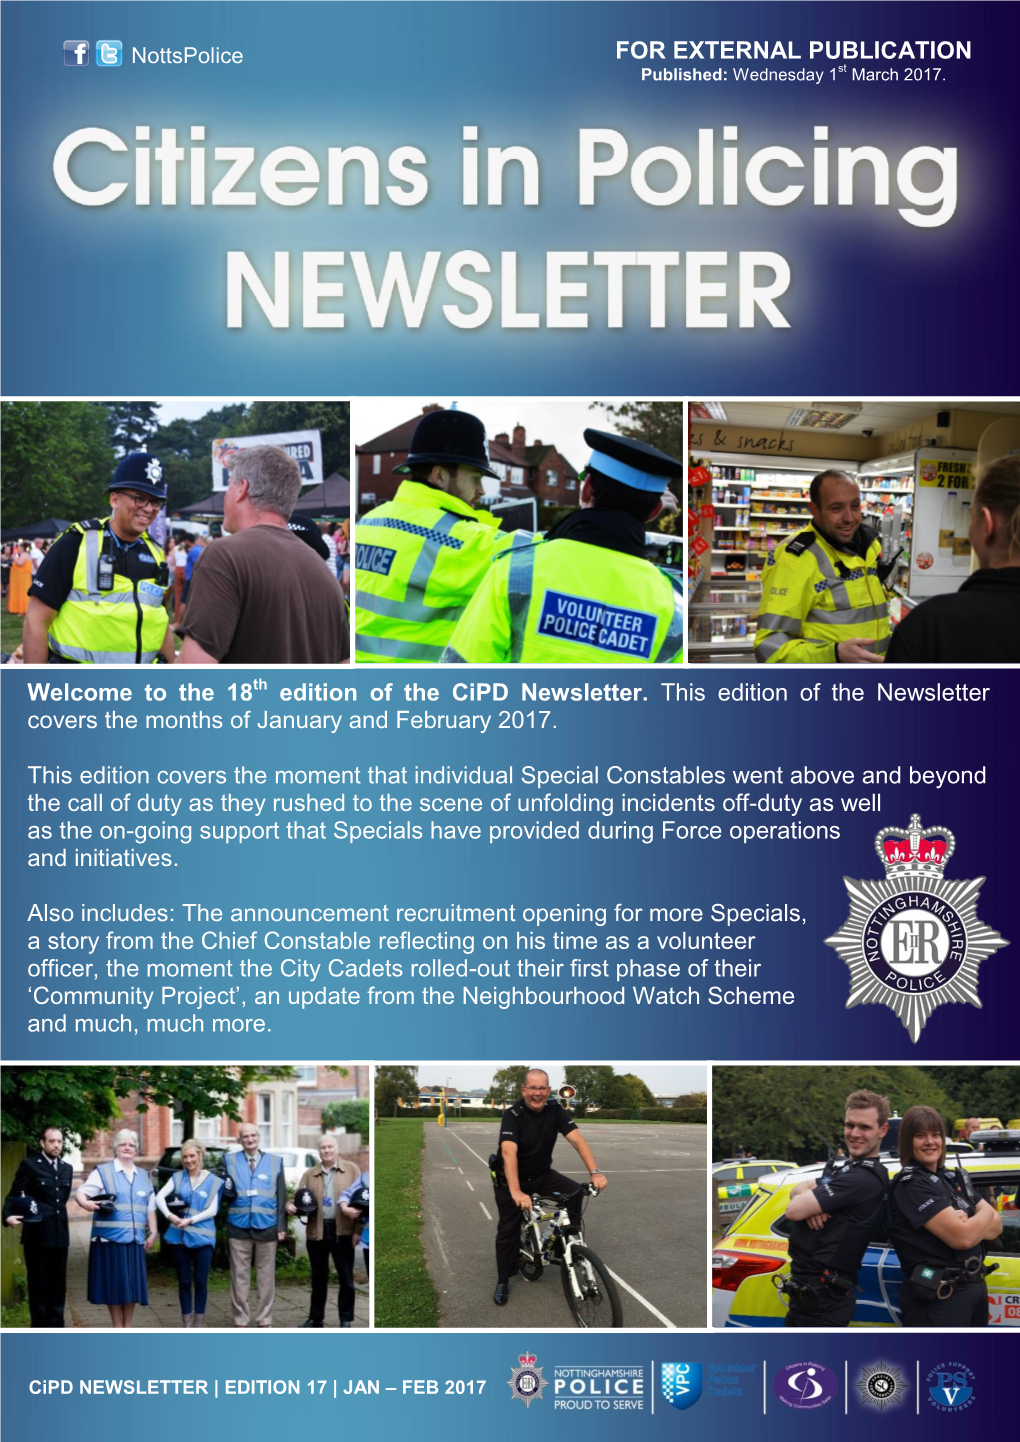 Citizens in Policing Newsletter: Edition 18